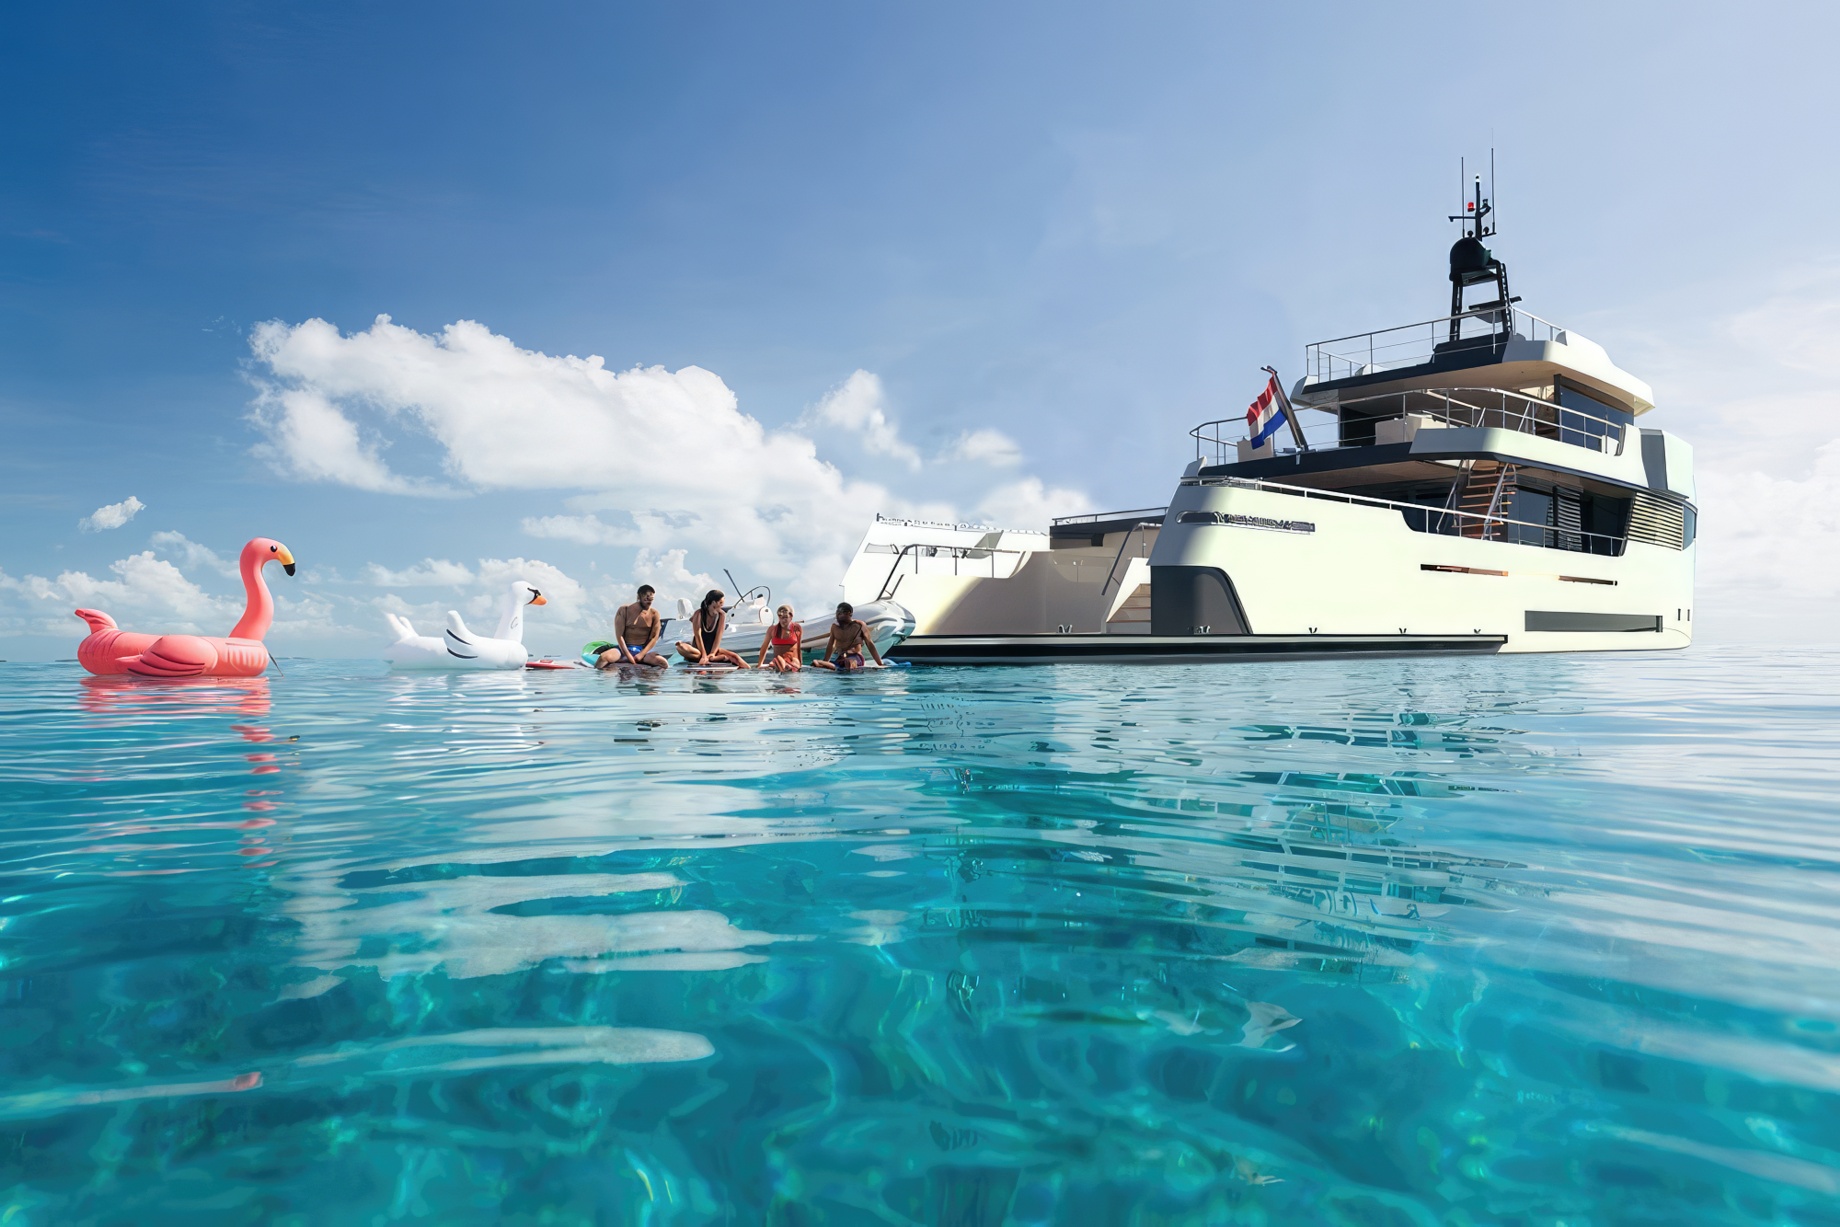 The Adventure Series – A Line of Explorer Yachts For Sale Conceived by Lynx Yachts to Navigate the World – Luxurious Amenities for Seafaring Activities